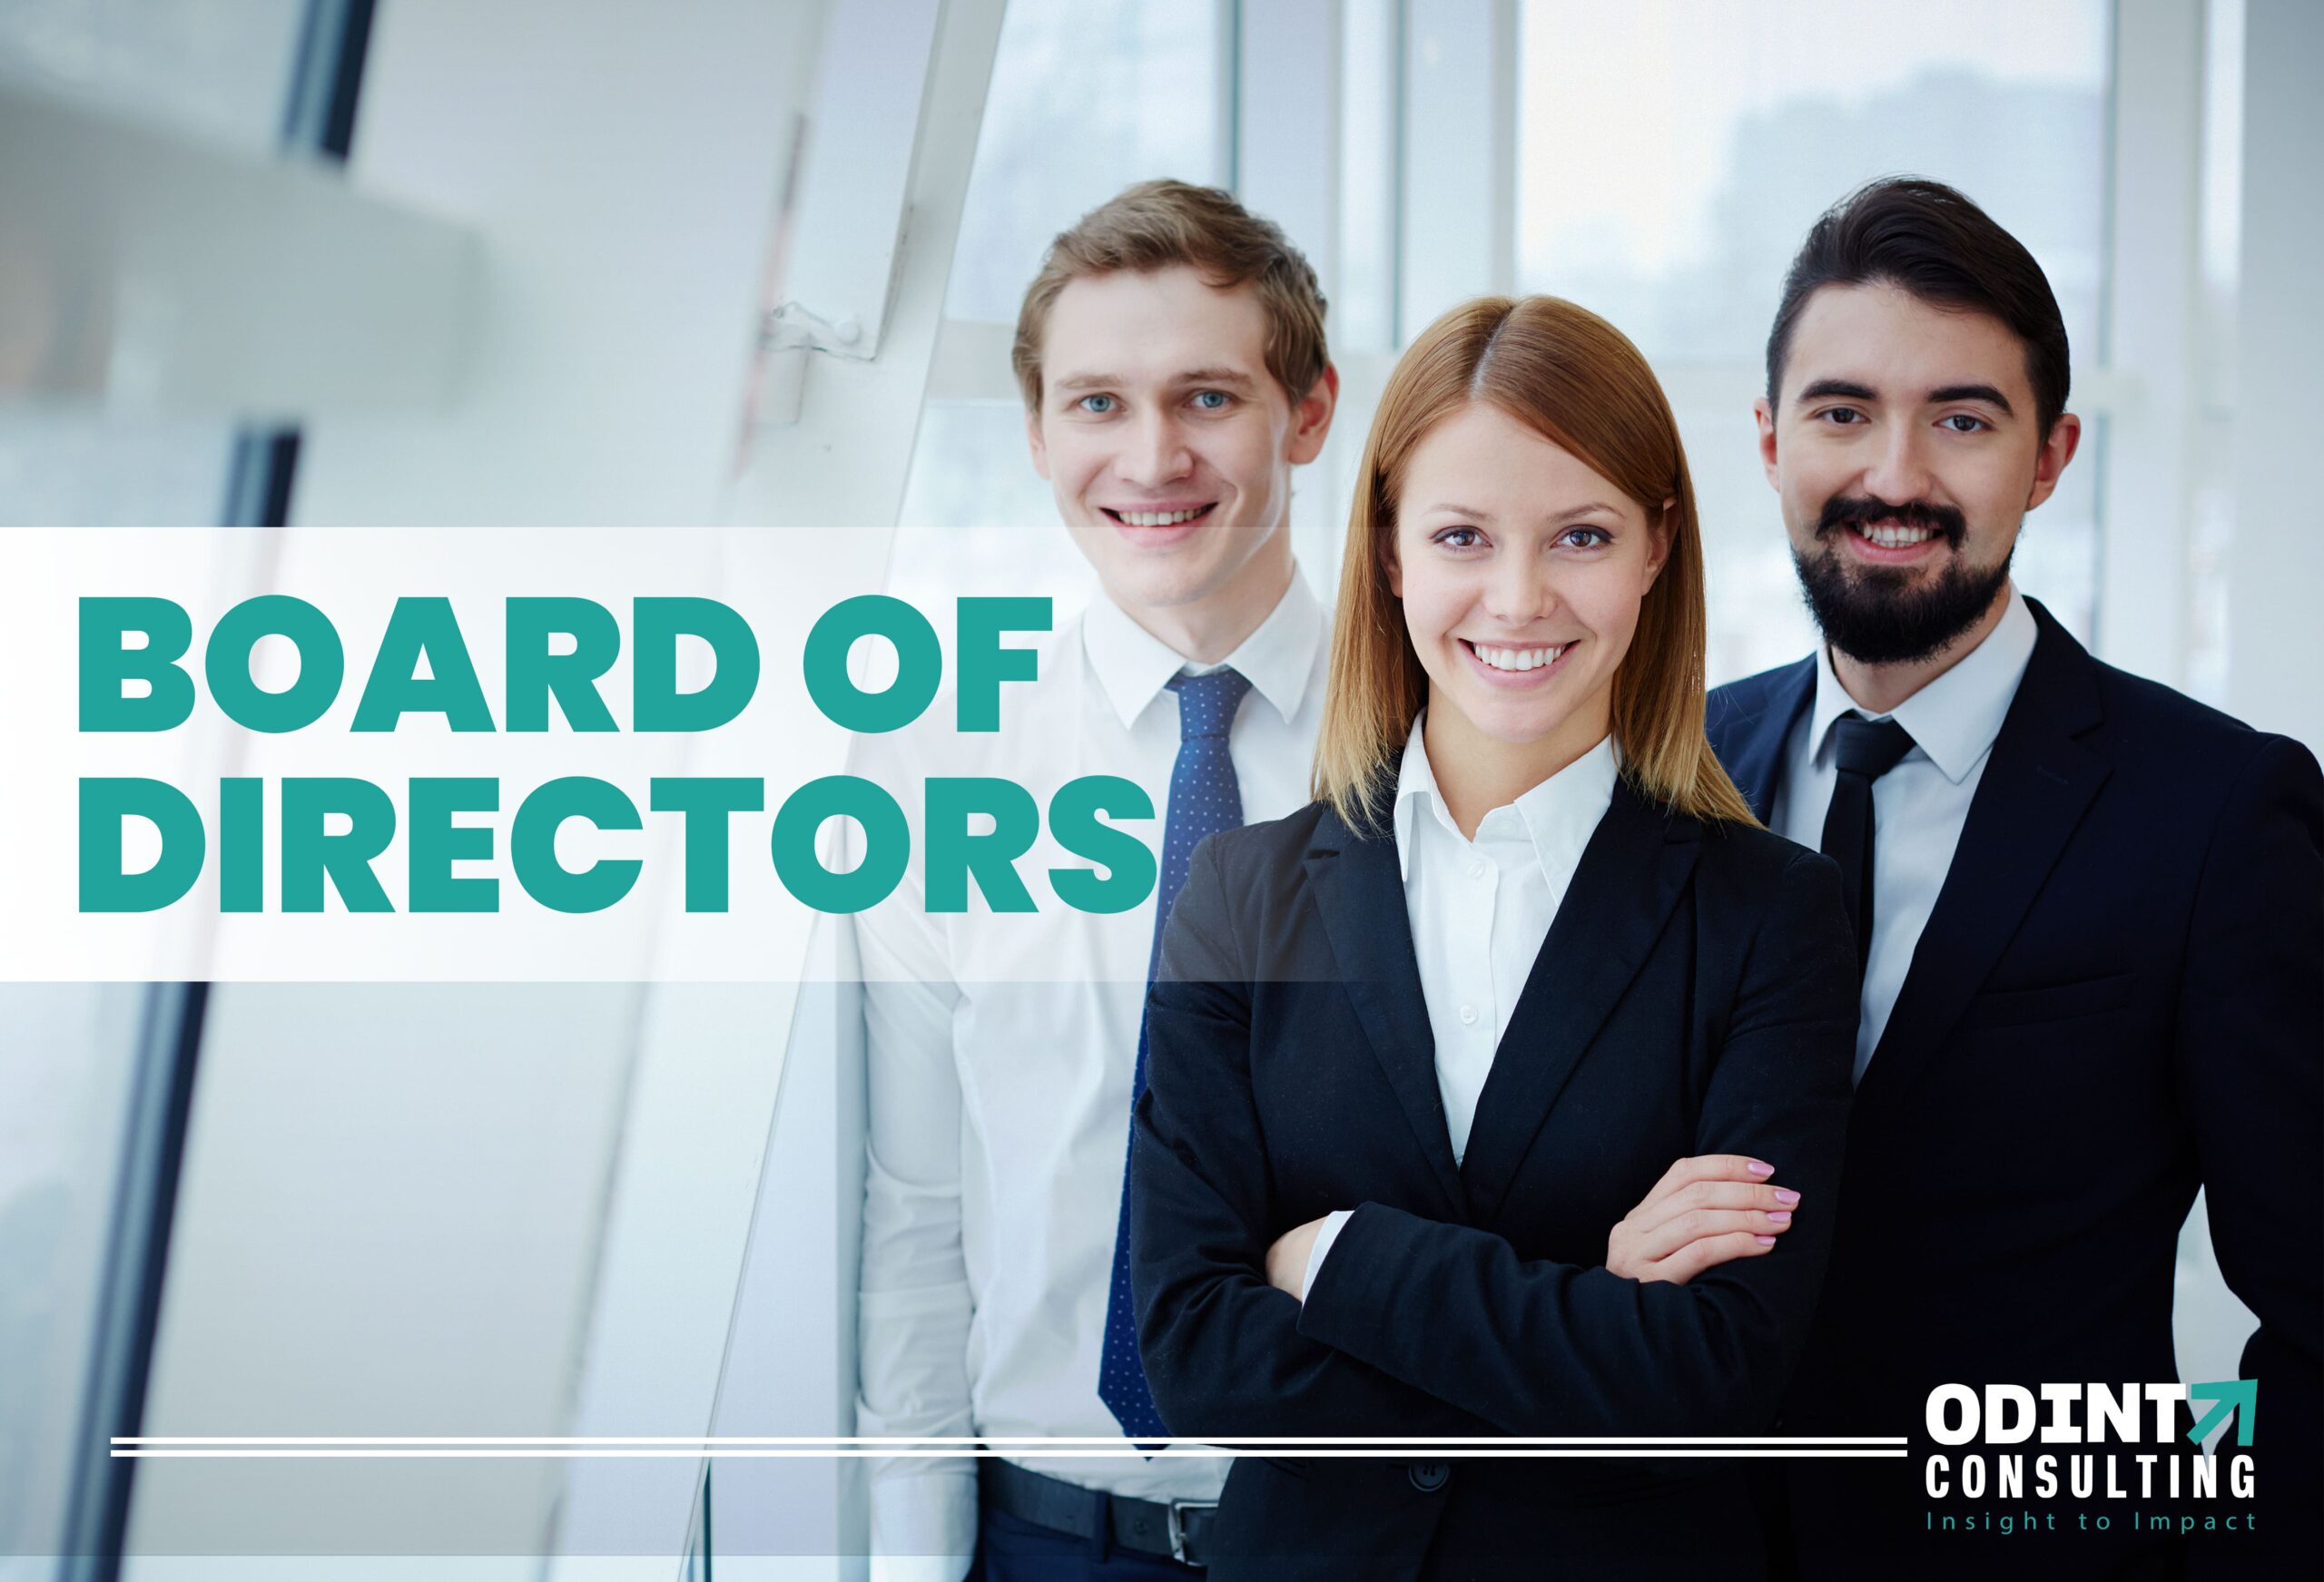 Board Of Directors – Definition, Roles & Responsibilities Explained